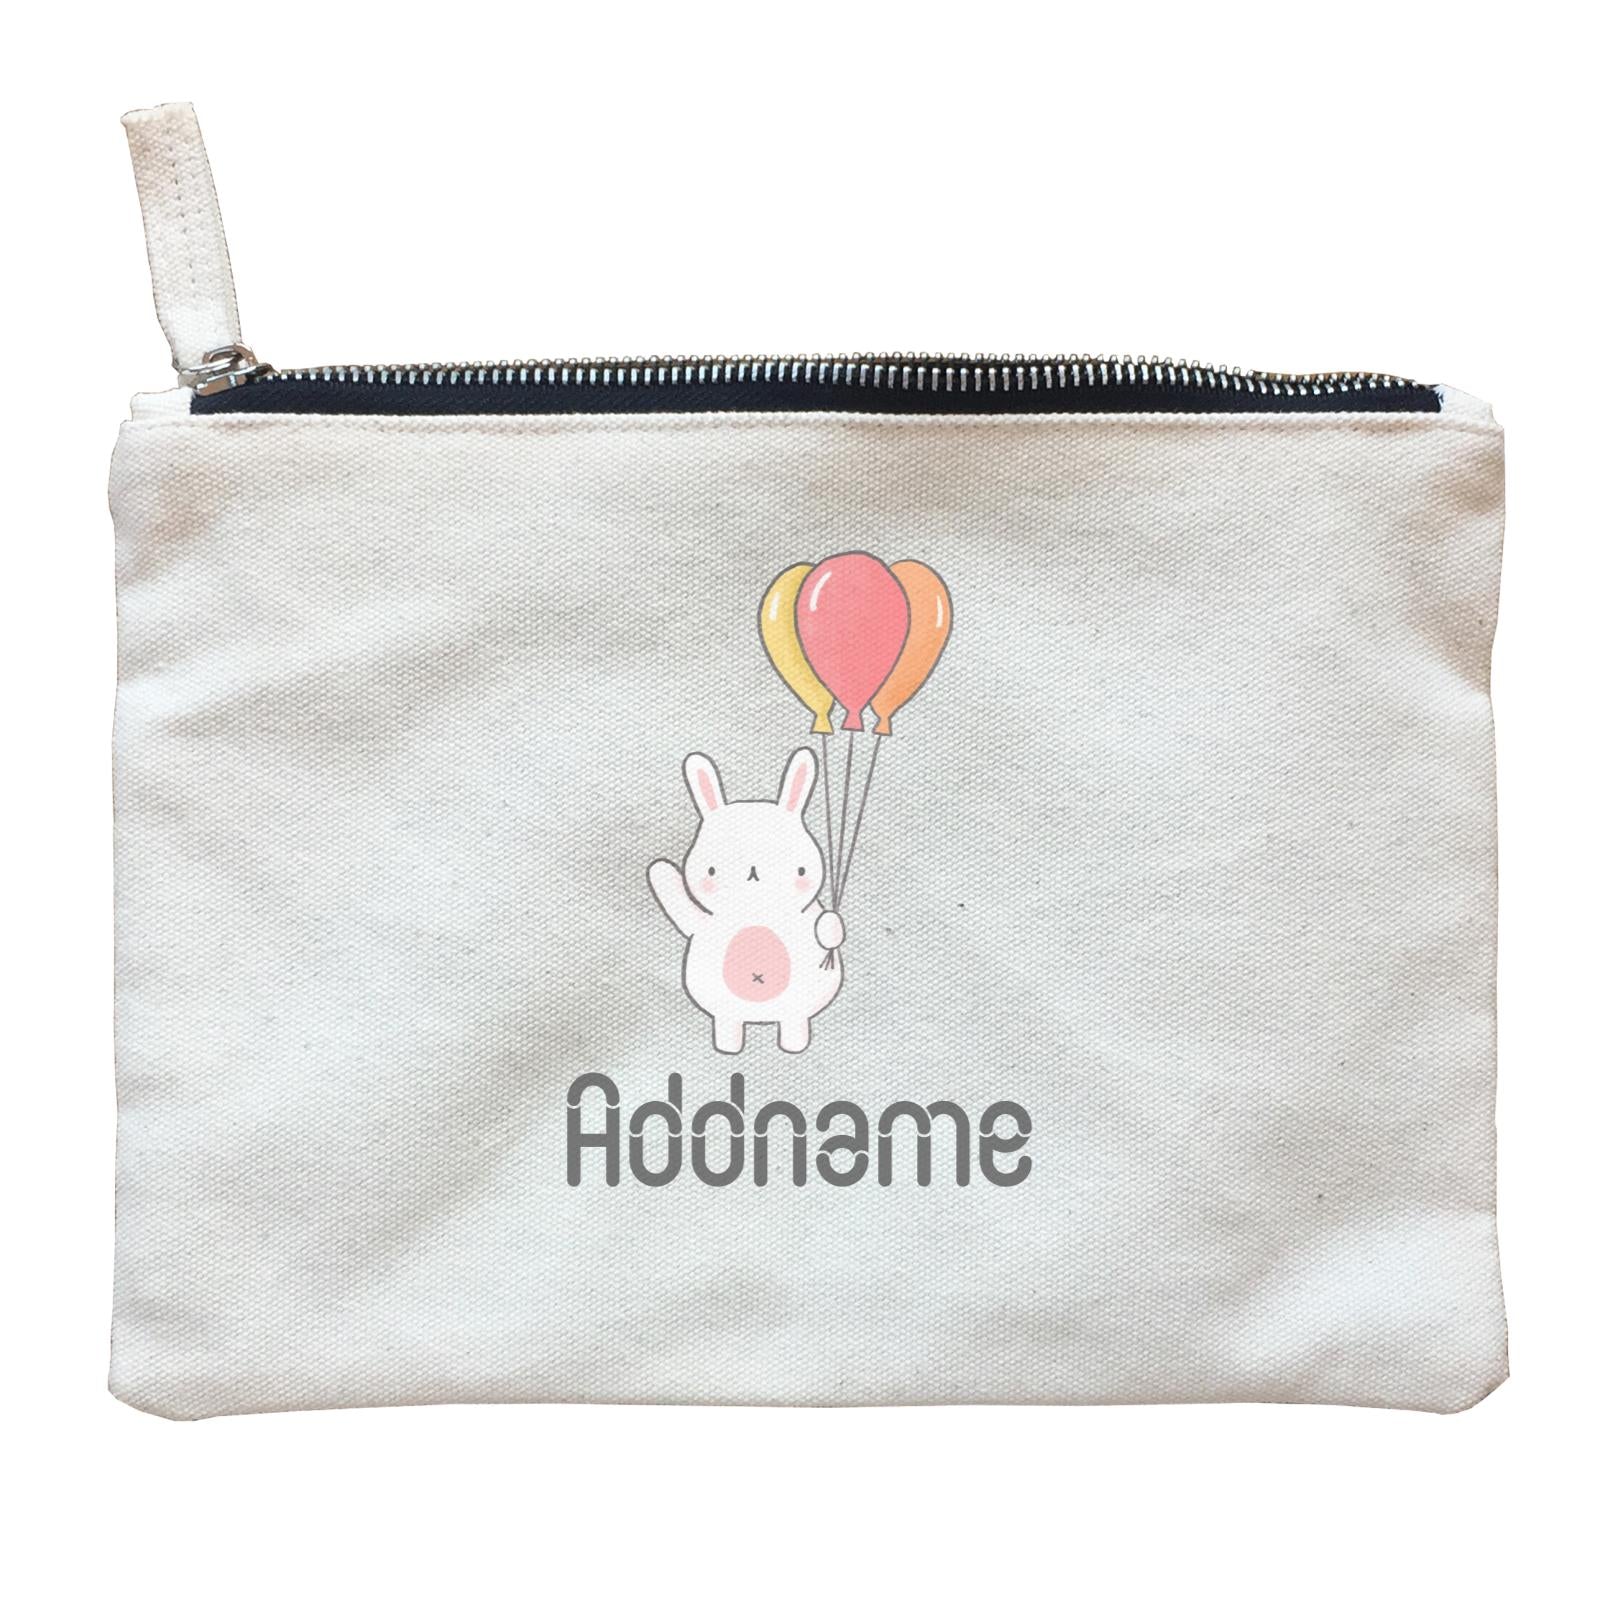 Cute Hand Drawn Style Rabbit with Balloon Addname Zipper Pouch